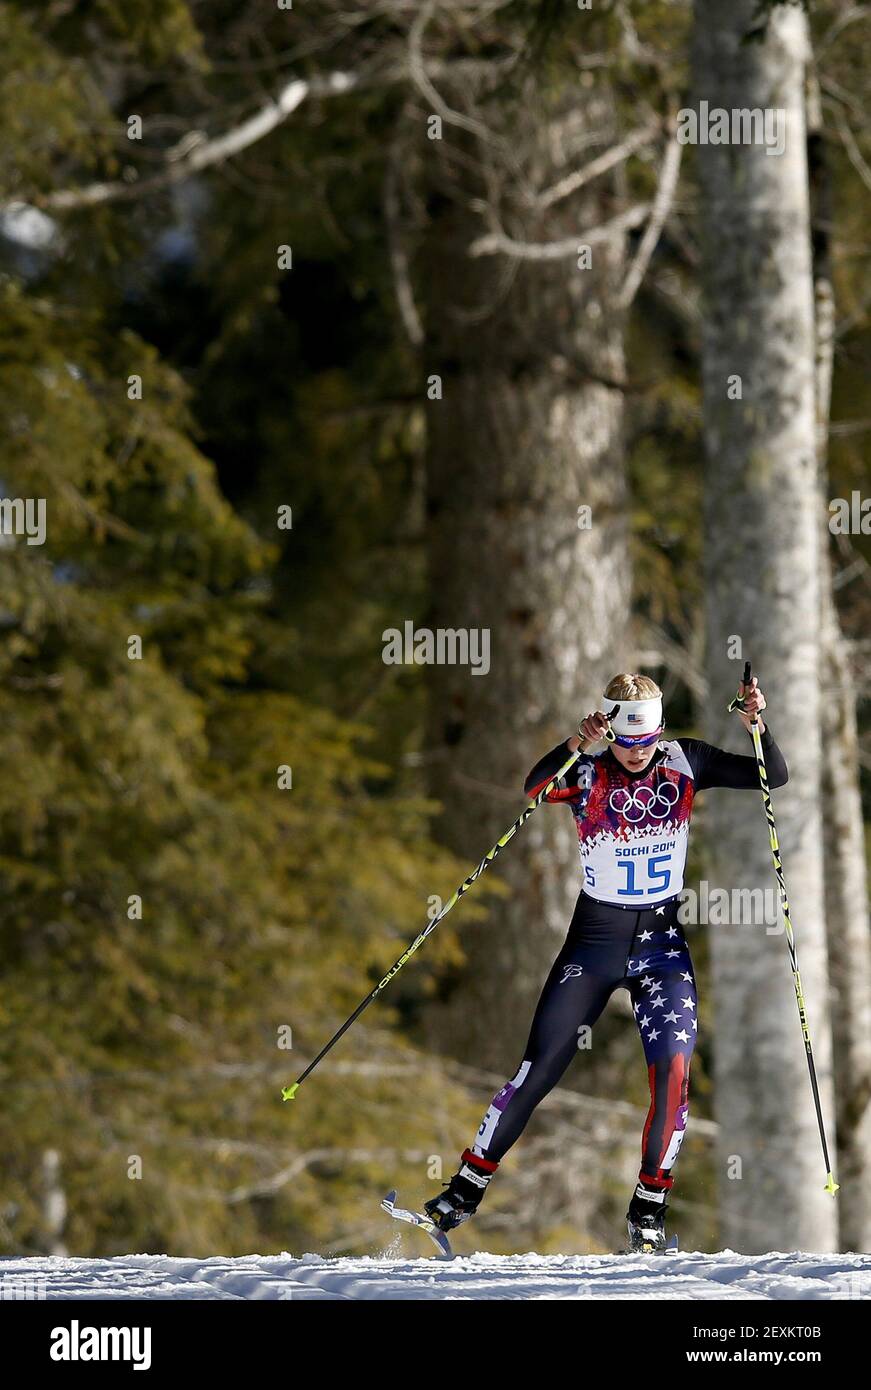 Jessie Diggins of the United States competes in the Women's 7.5m + 7.5m Skiathlon in the 2014 Winter Olympics in Sochi, Russia. (Photo by Carlos Gonzalez/Minneapolis Star Triubne/MCT/Sipa USA) Stock Photo